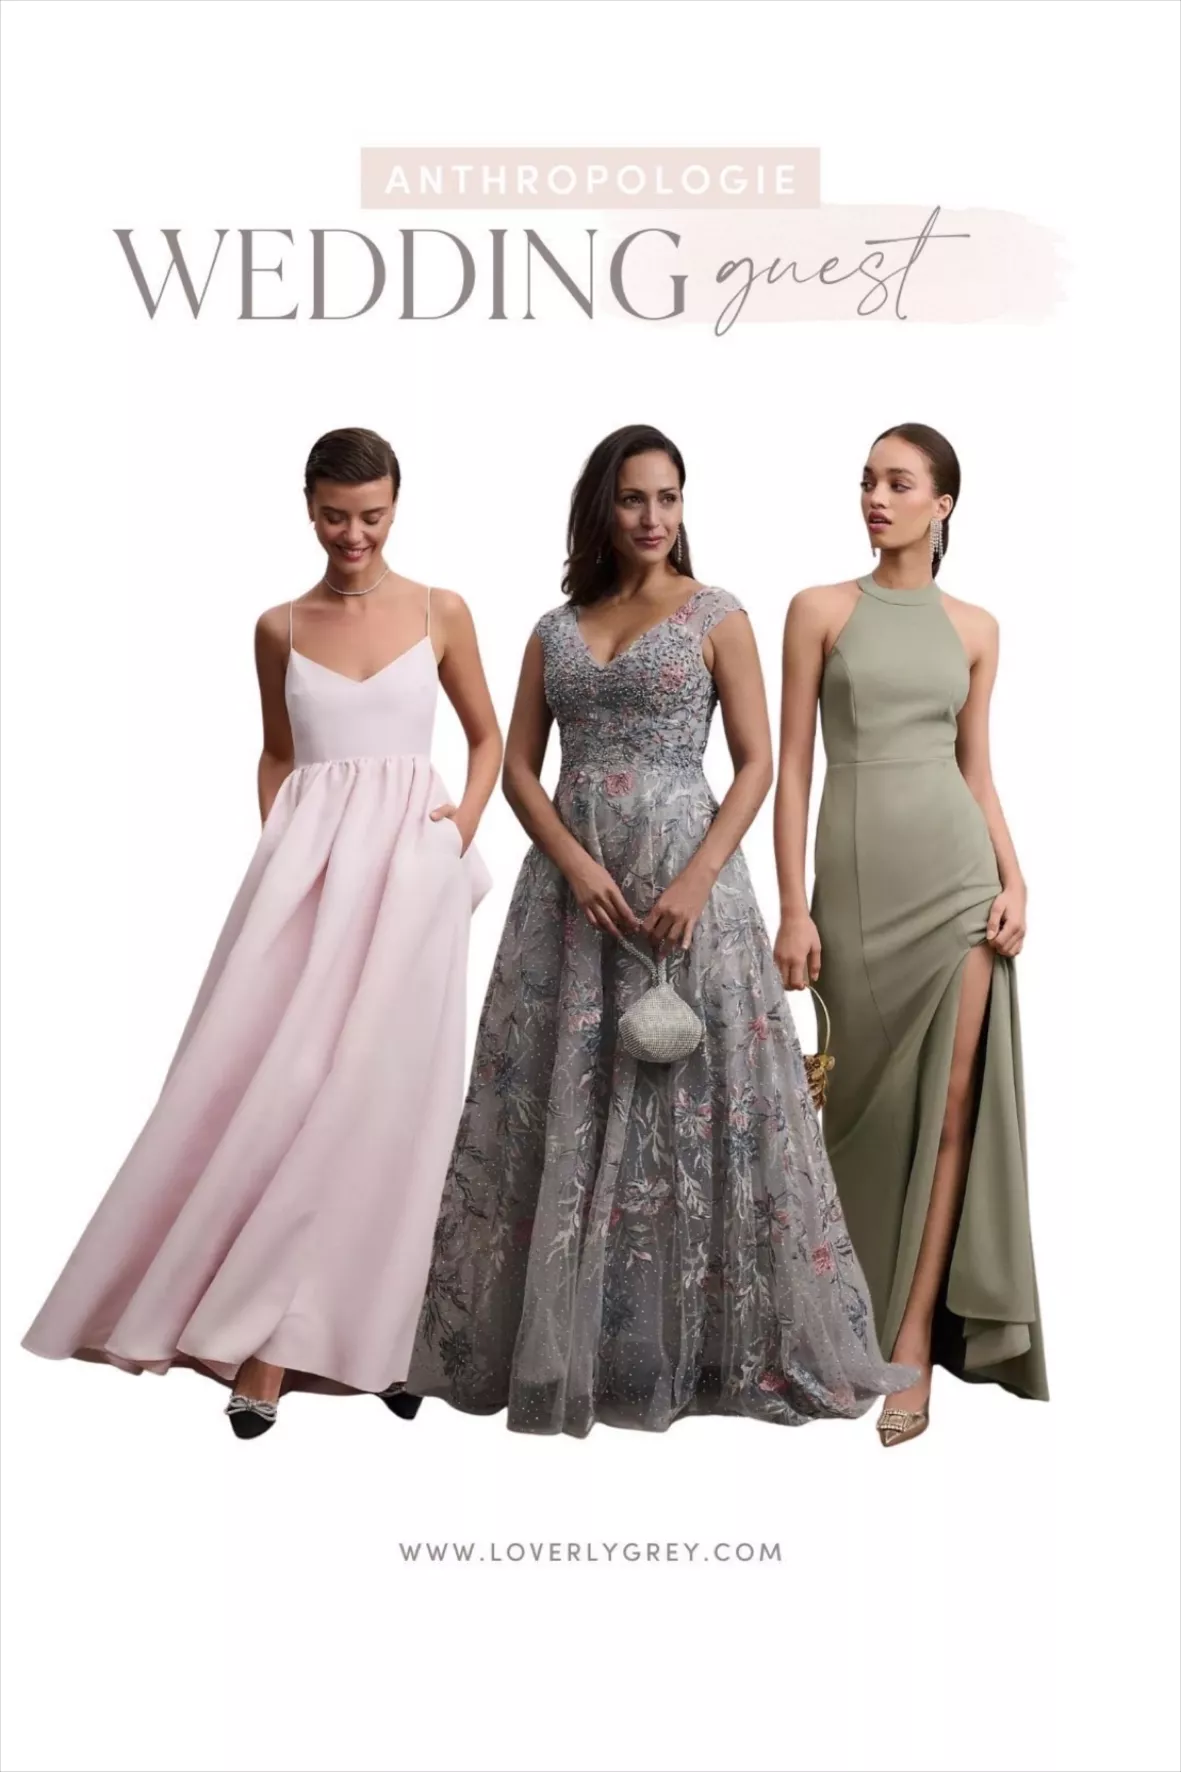 Spring Wedding Guest Dress Guide - Loverly Grey